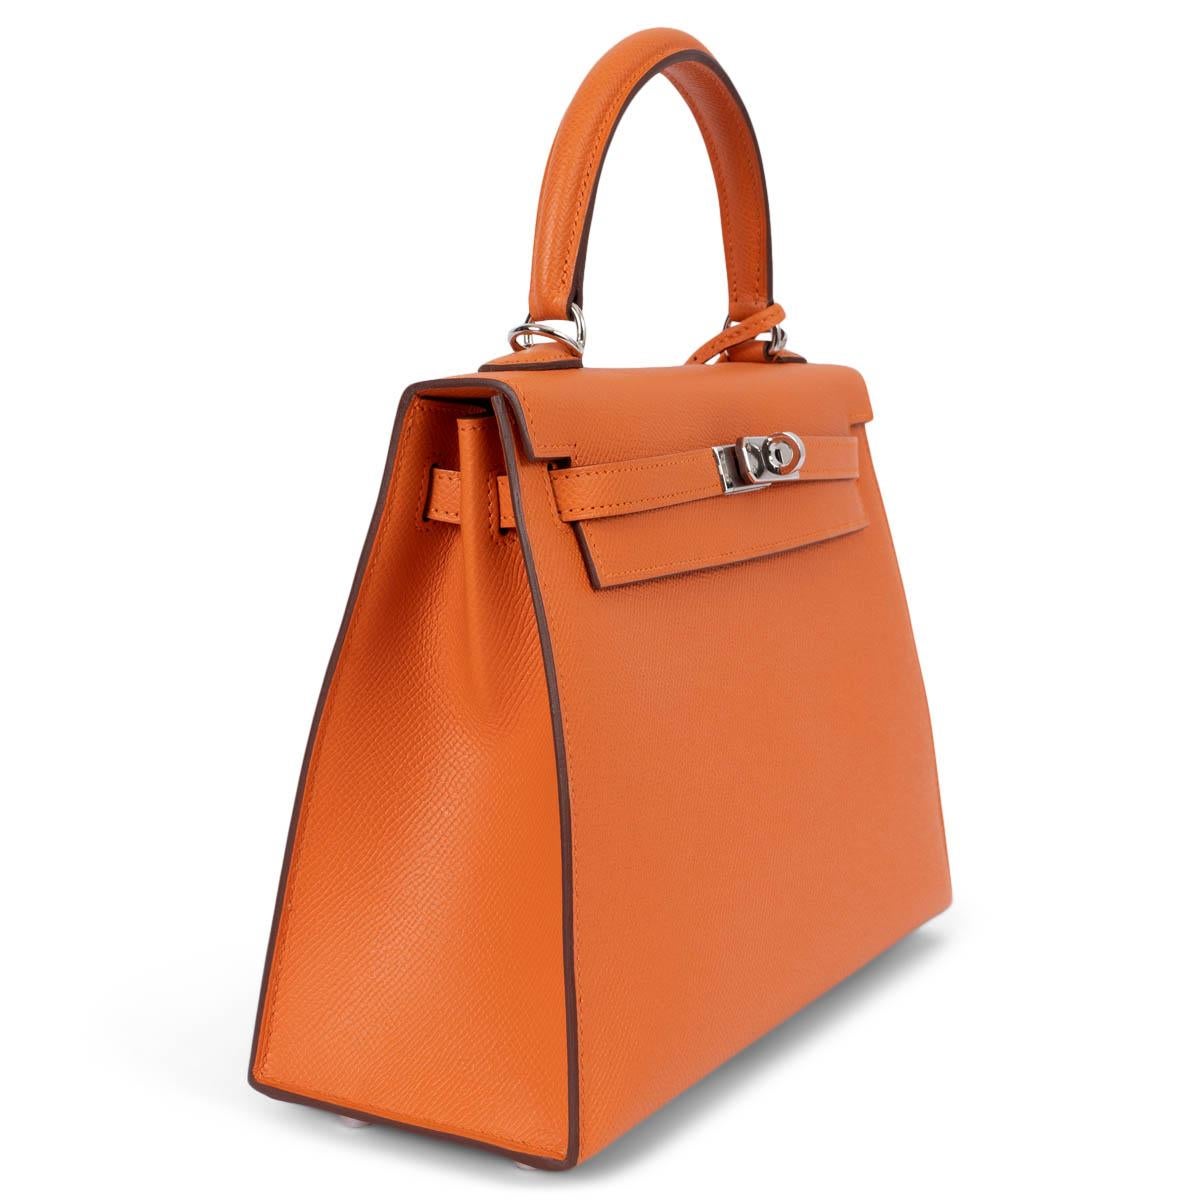 100% authentic Hermès Kelly 25 Sellier bag in orange Veau Epsom leather with palladium hardware. Lined in Chevre (goat skin) with an open pocket against the front and a zipper pocket against the back. Brand new - comes with